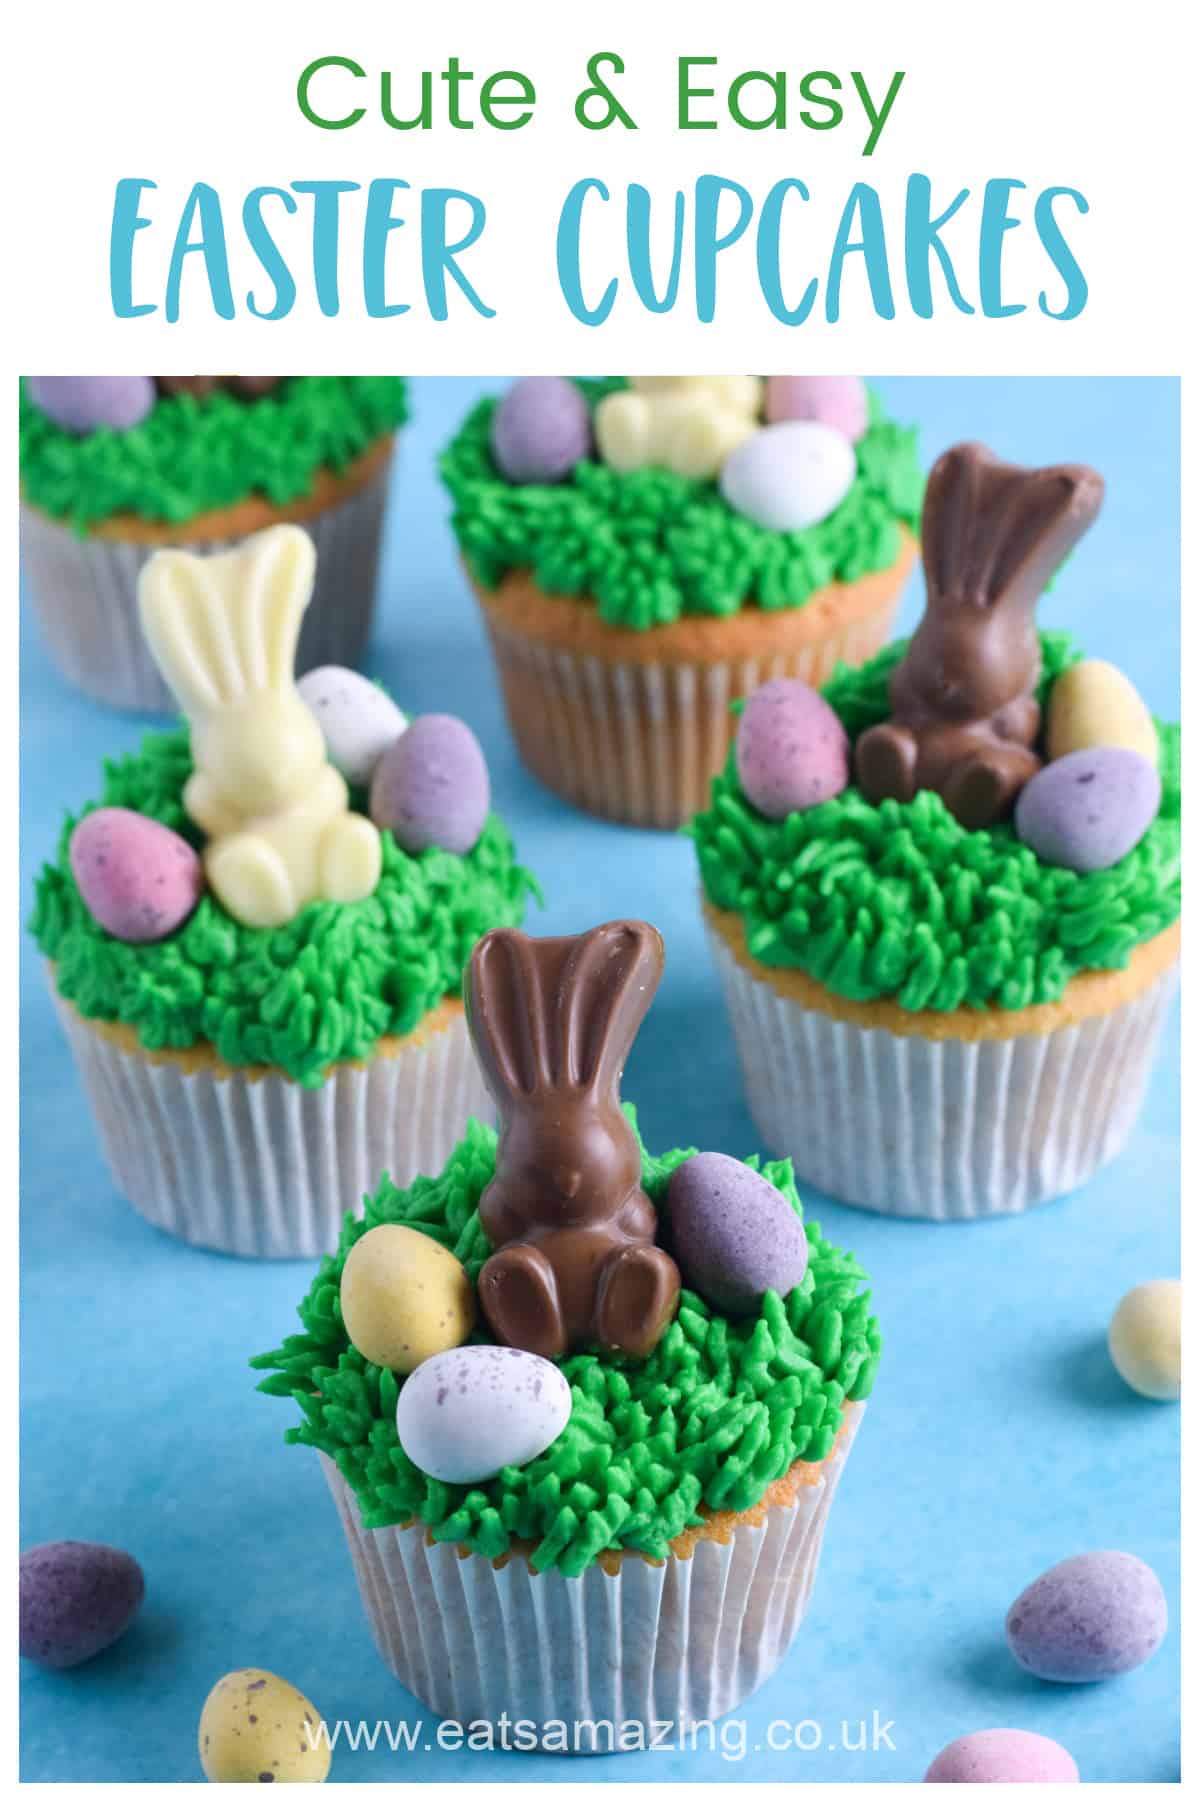 How to make cute and easy Easter Cupcakes with chocolate bunnies - fun Easter recipe for kids